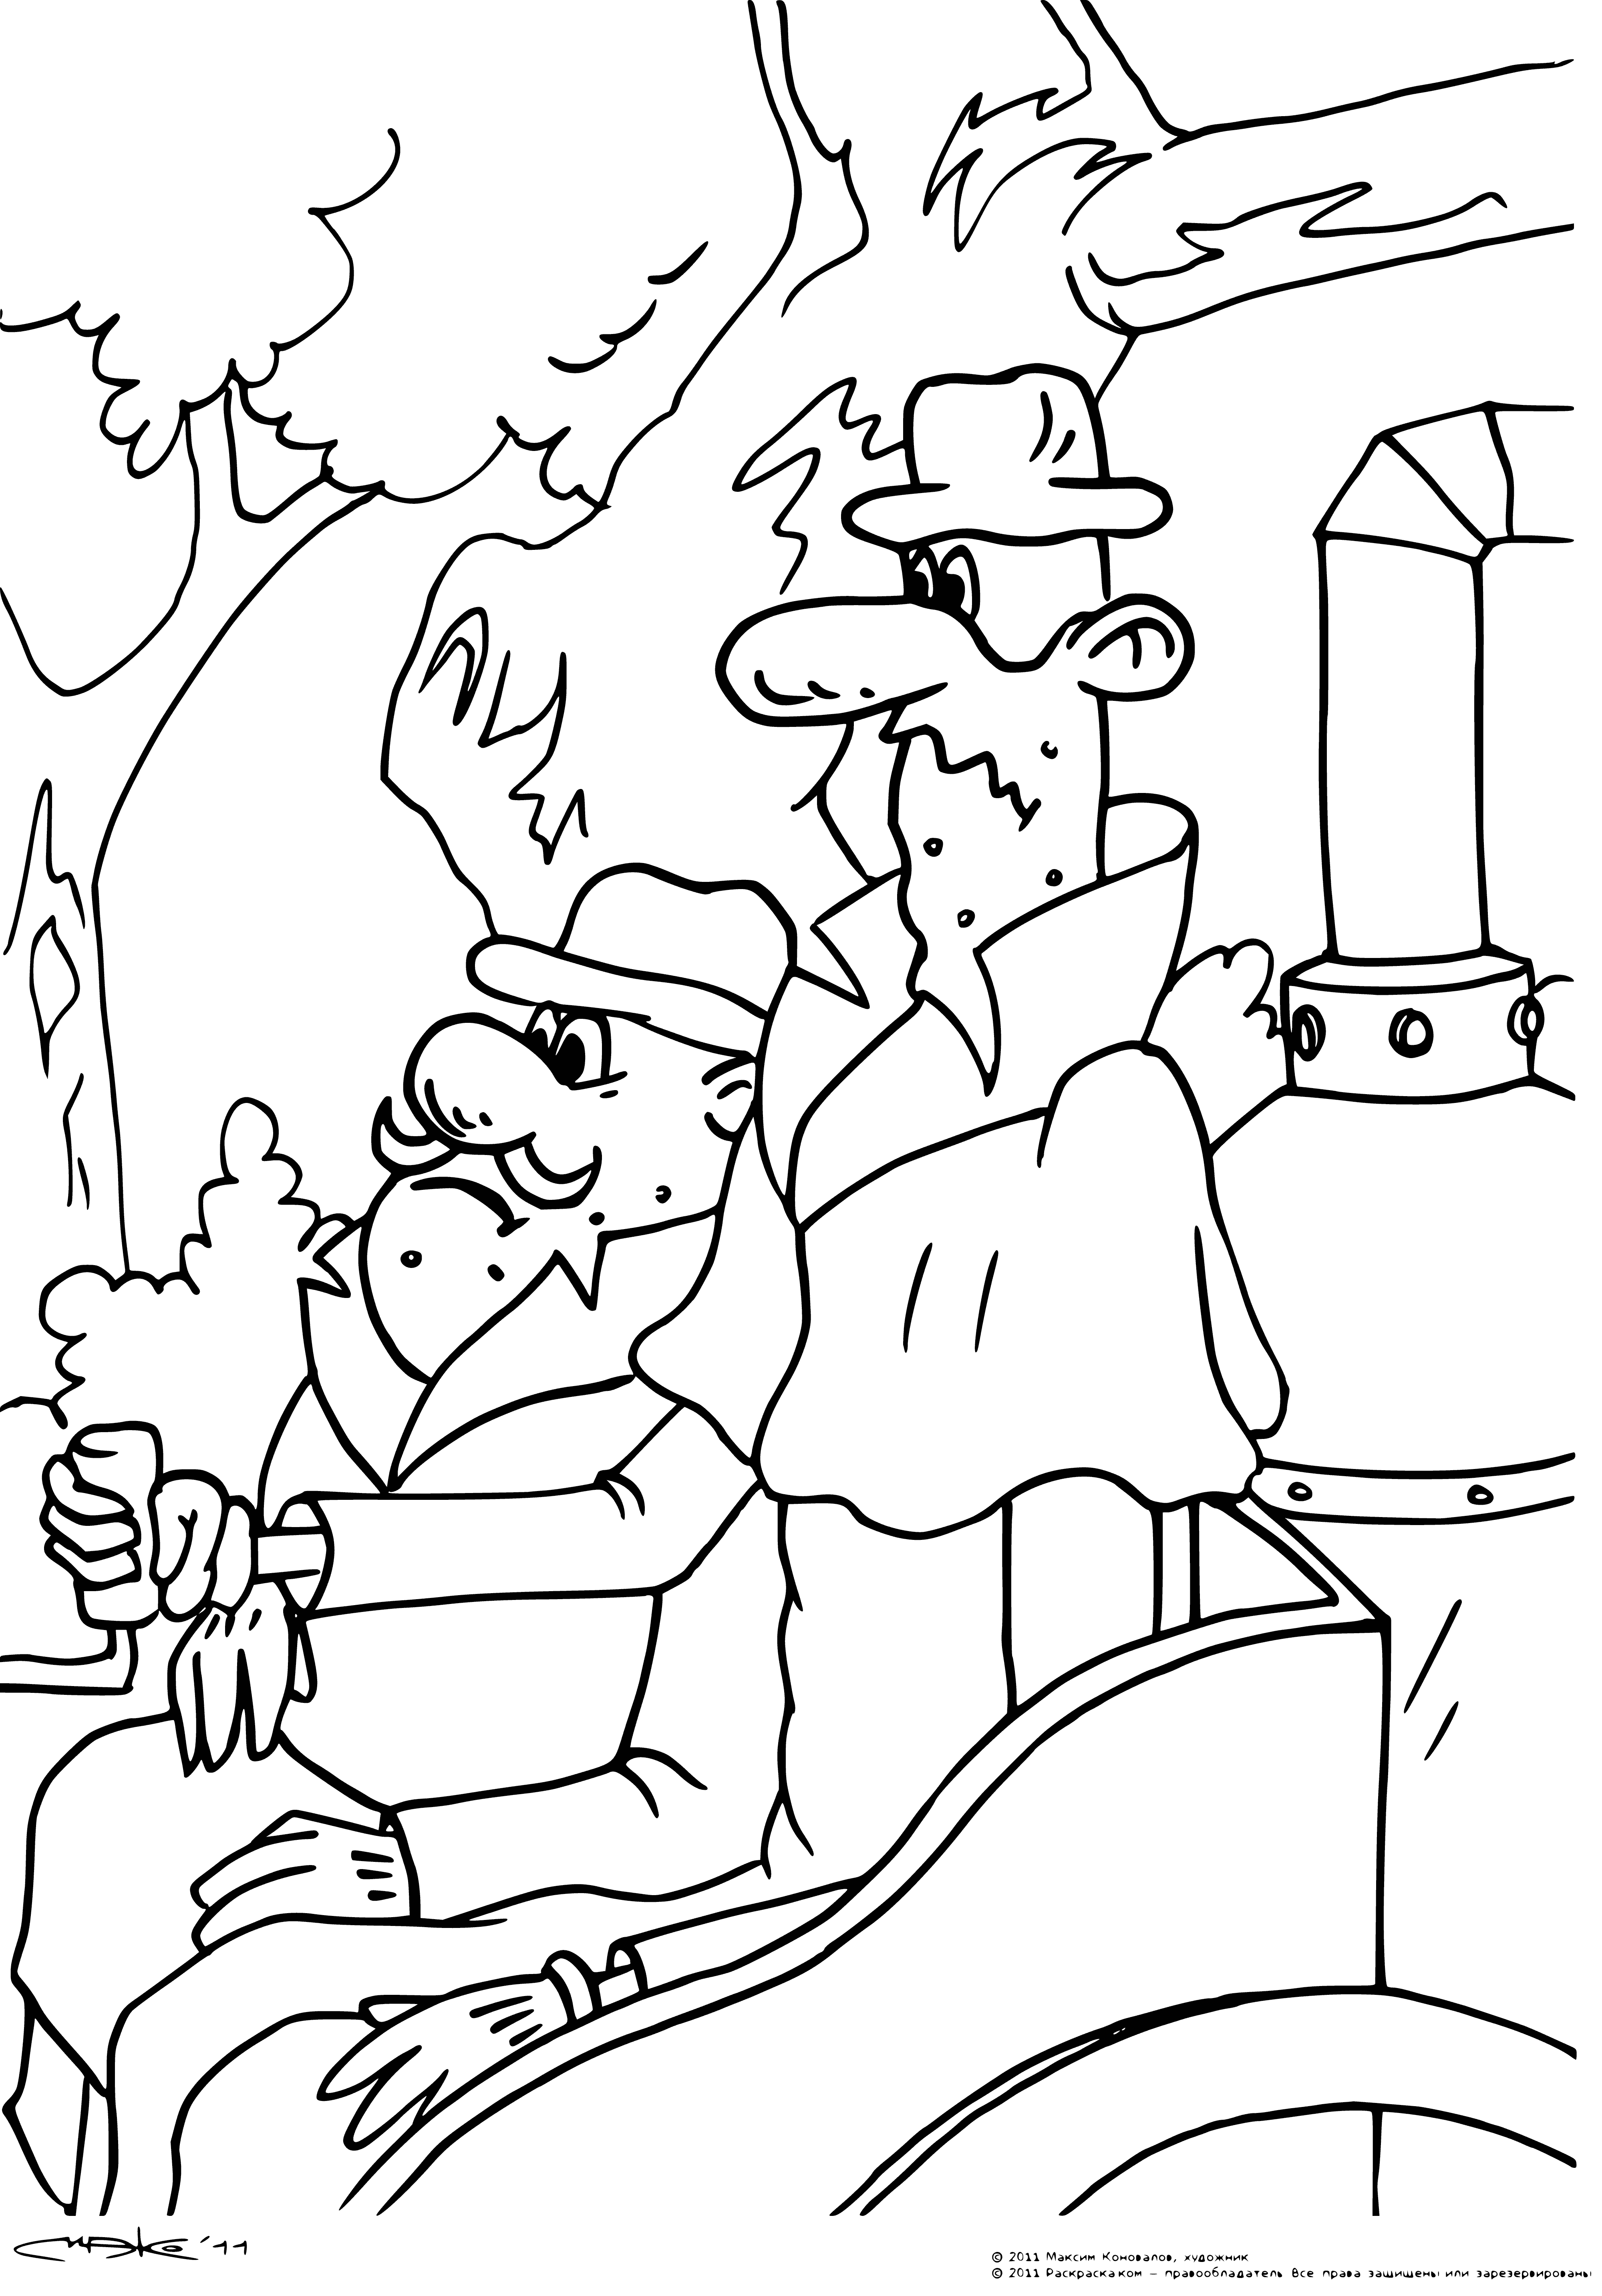 coloring page: Two detective dogs, Funtik & friends, are on a mission to solve a case. With professionalism & dedication they'll uncover the truth! #dogdetectives